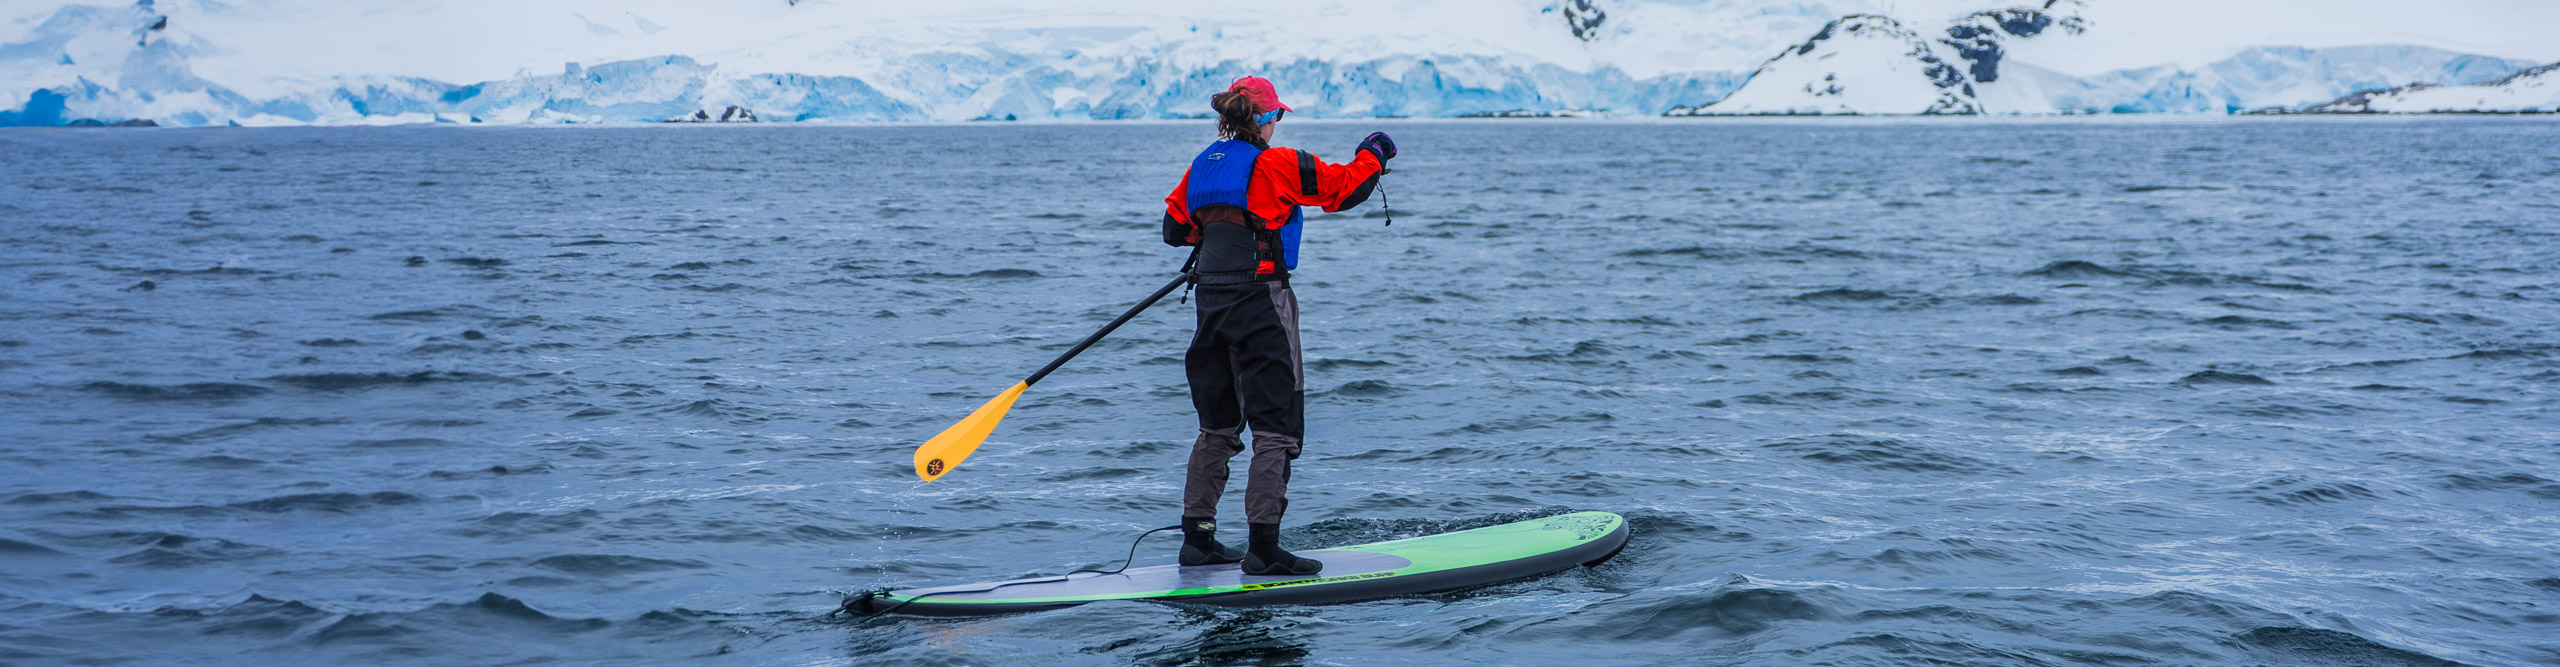 Women on paddle board in Antarctica 